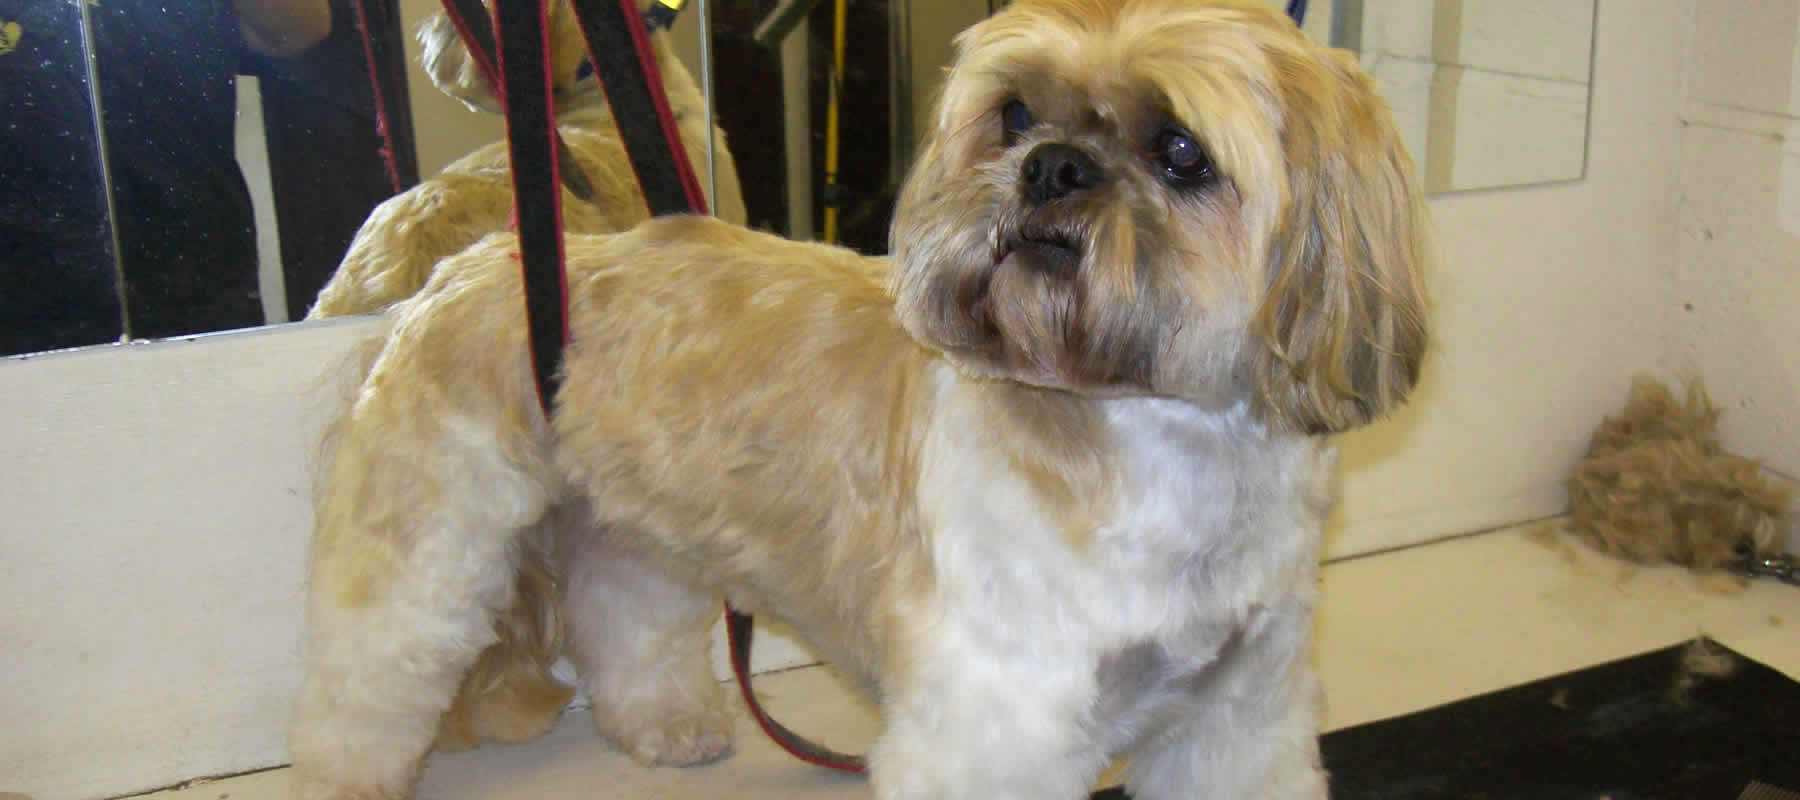 Dapper Dogs Professional Dog Grooming in Wilmslow Dog Groomers Wilmslow